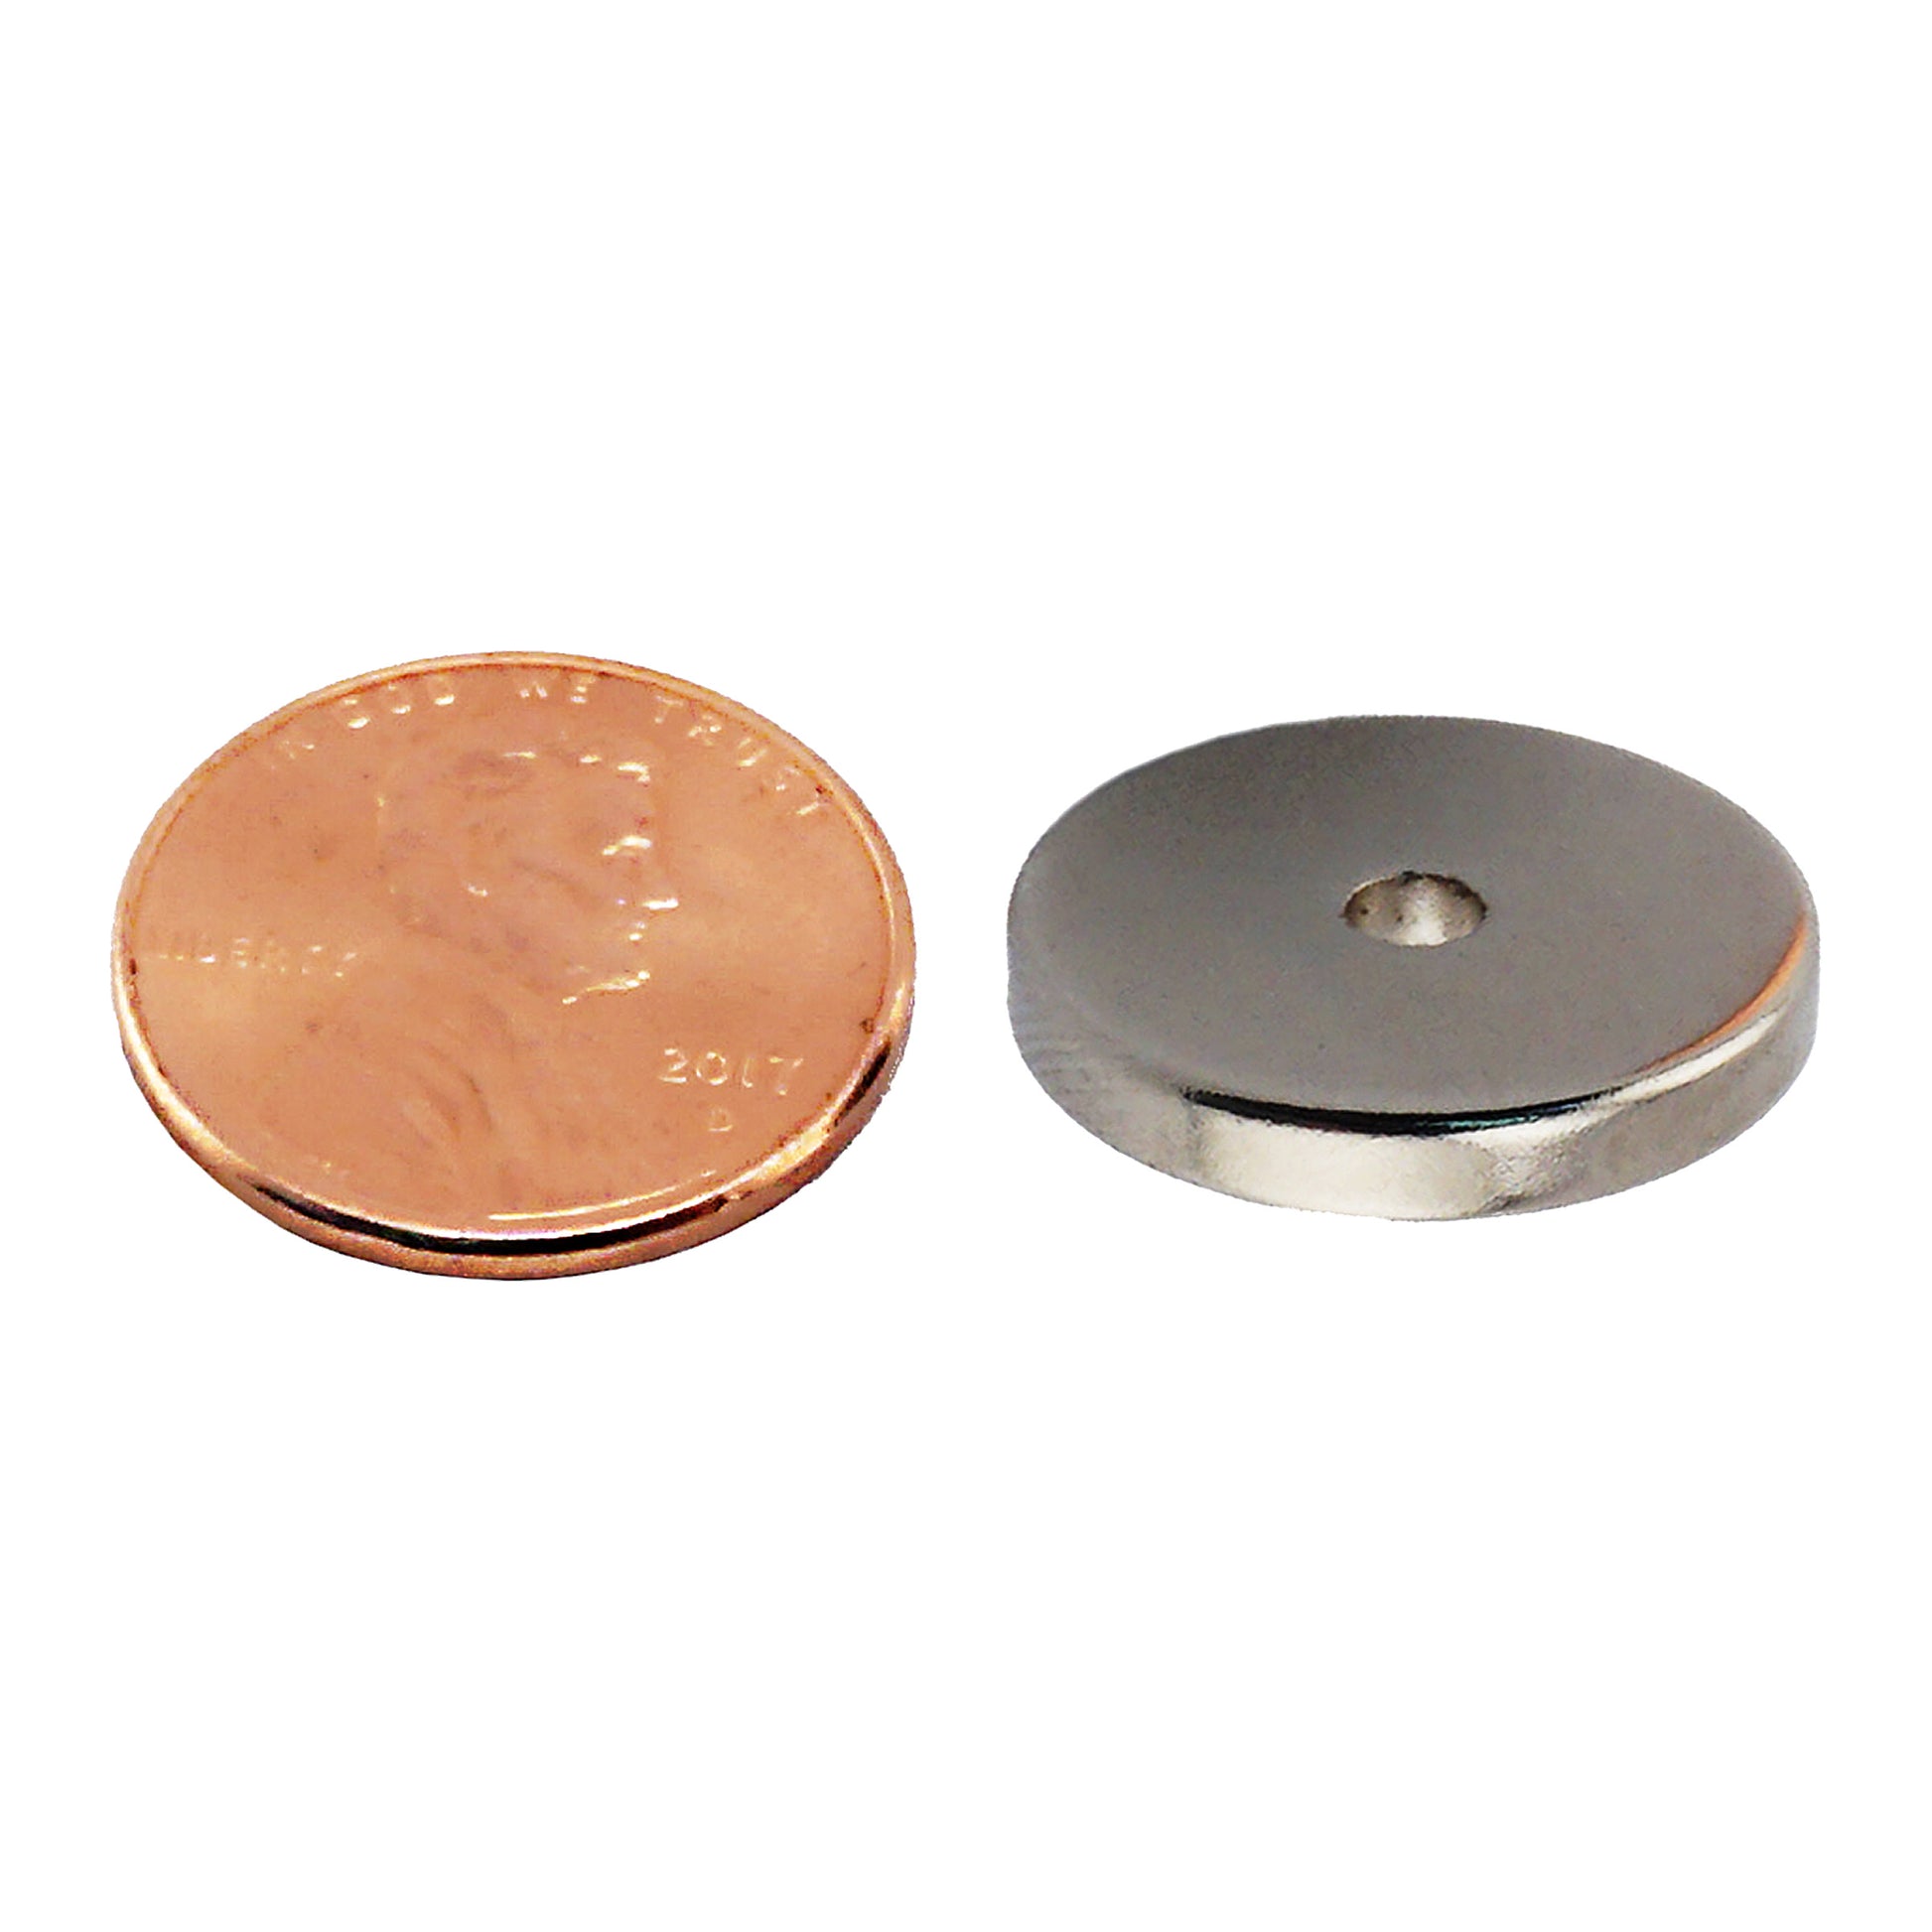 Load image into Gallery viewer, NR007523NS01 Neodymium Ring Magnet - Compared to Penny for Size Reference